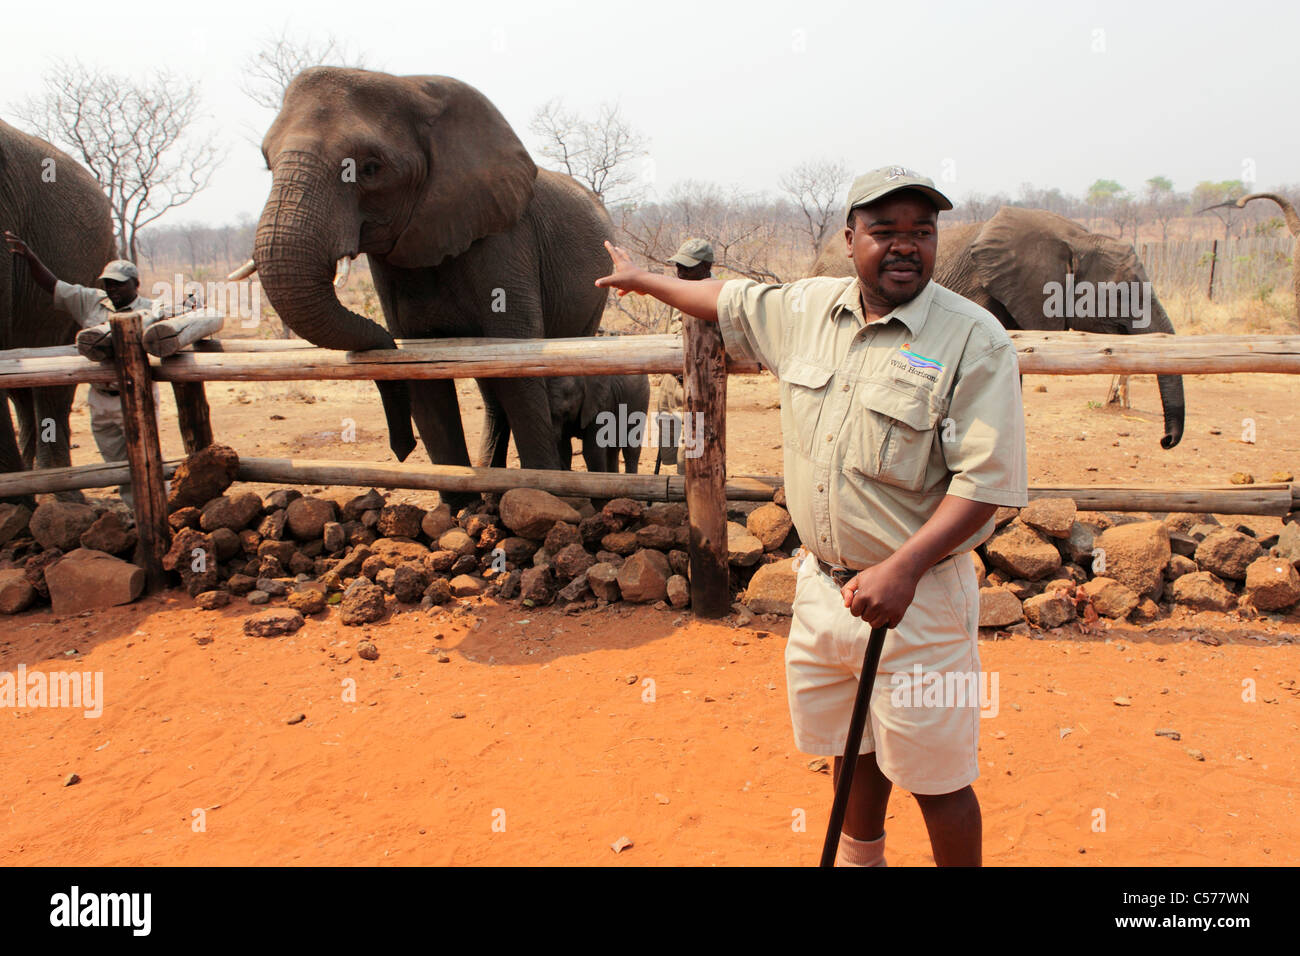 A staff member introduces the African elephants at the Wild Horizons Elephant Camp at Victoria Falls in Zimbabwe. Stock Photo